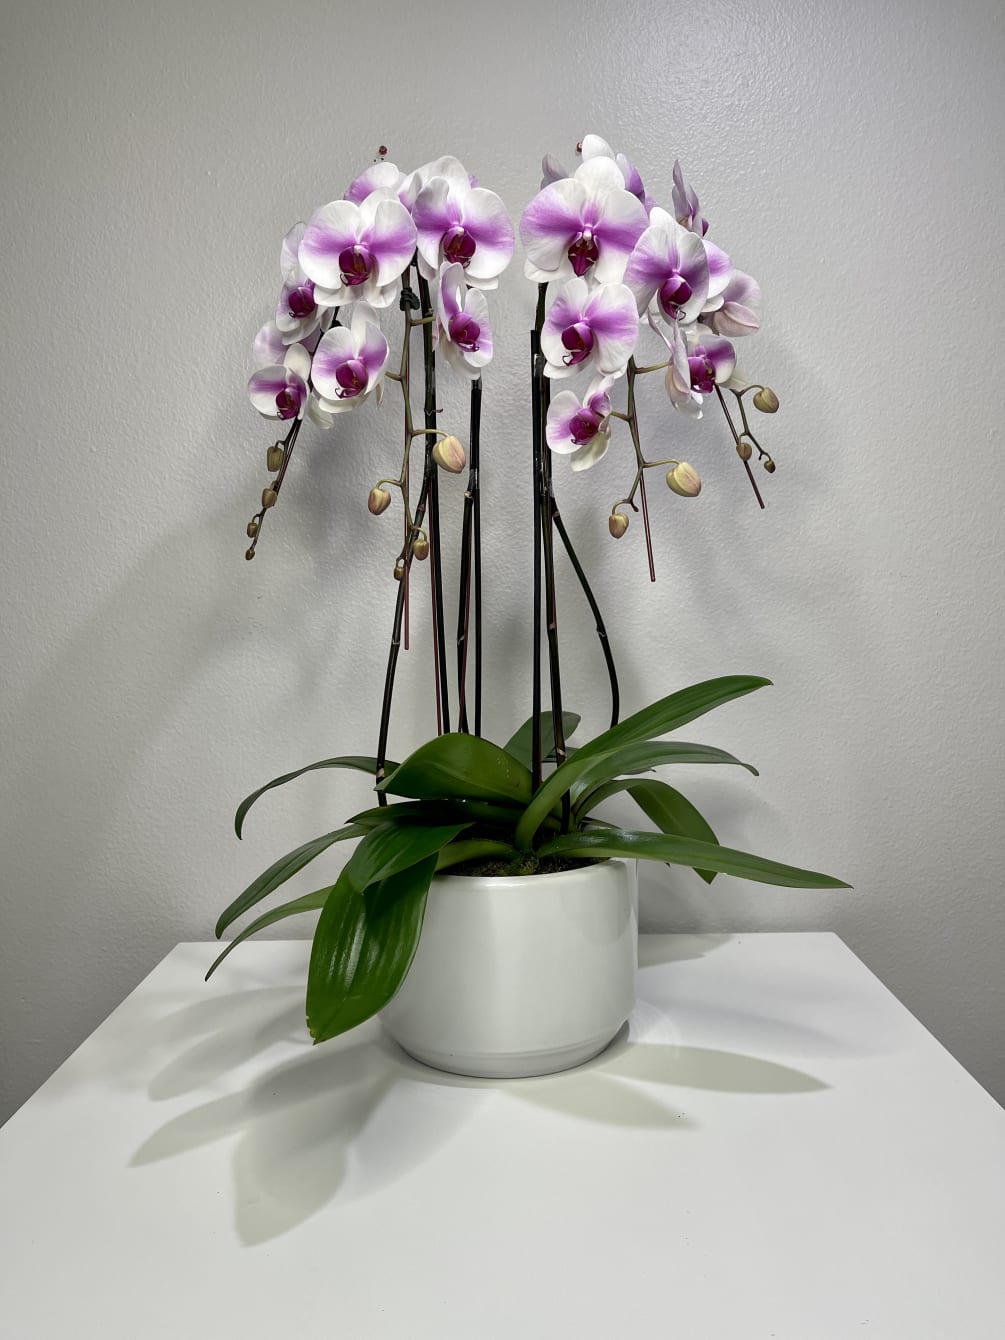 Pink and white orchids in white vase. Orchid color is subject to